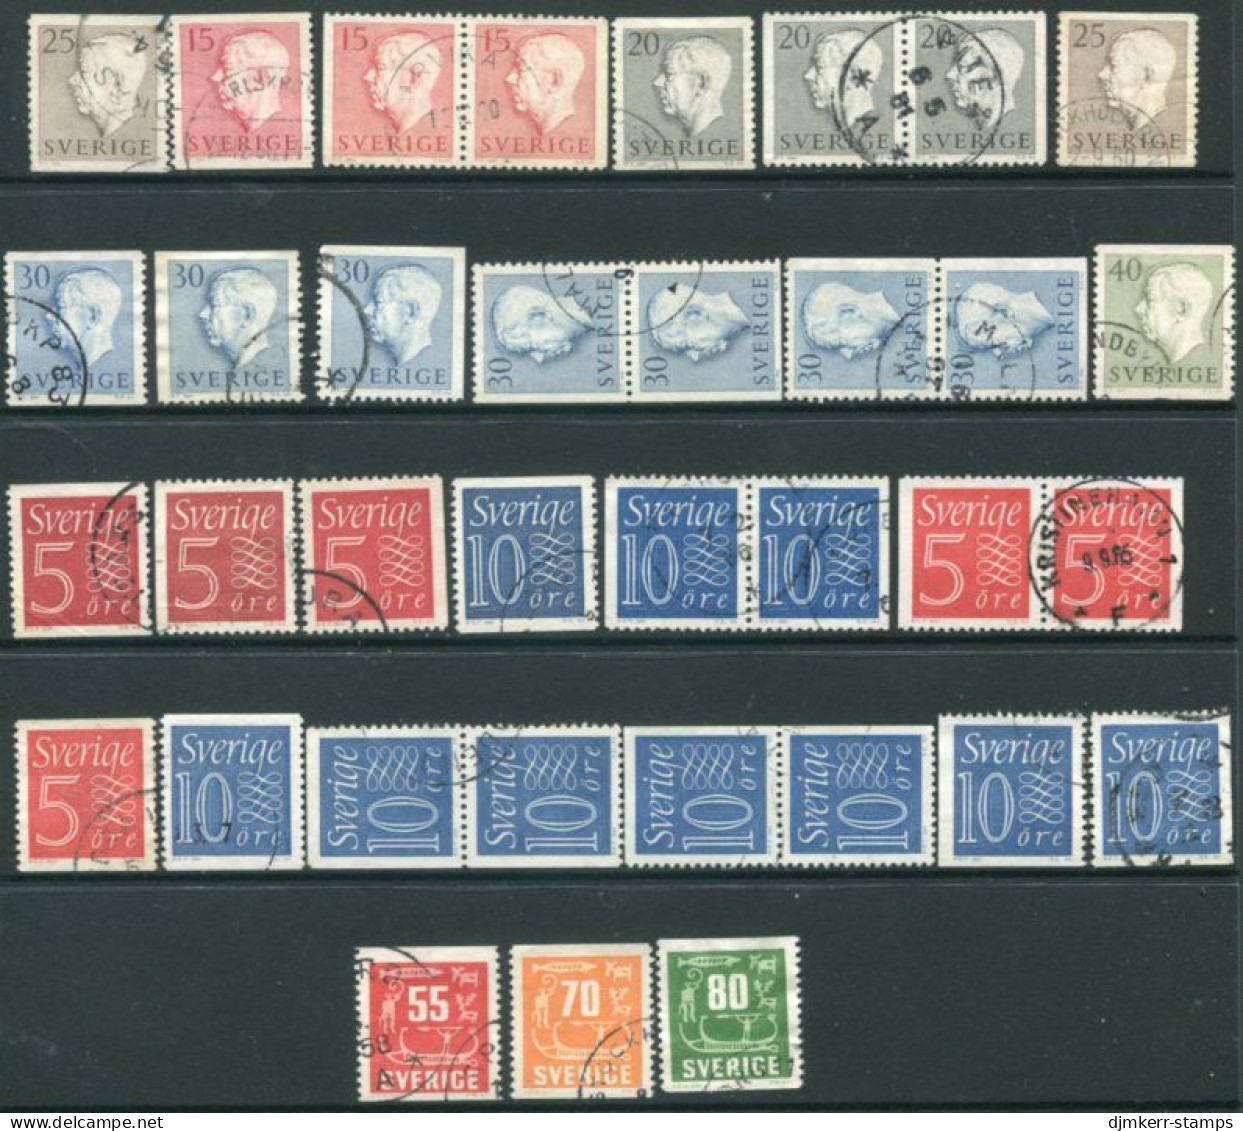 SWEDEN 1957 Complete Definitive Issues Used.  Michel 423-433 - Used Stamps